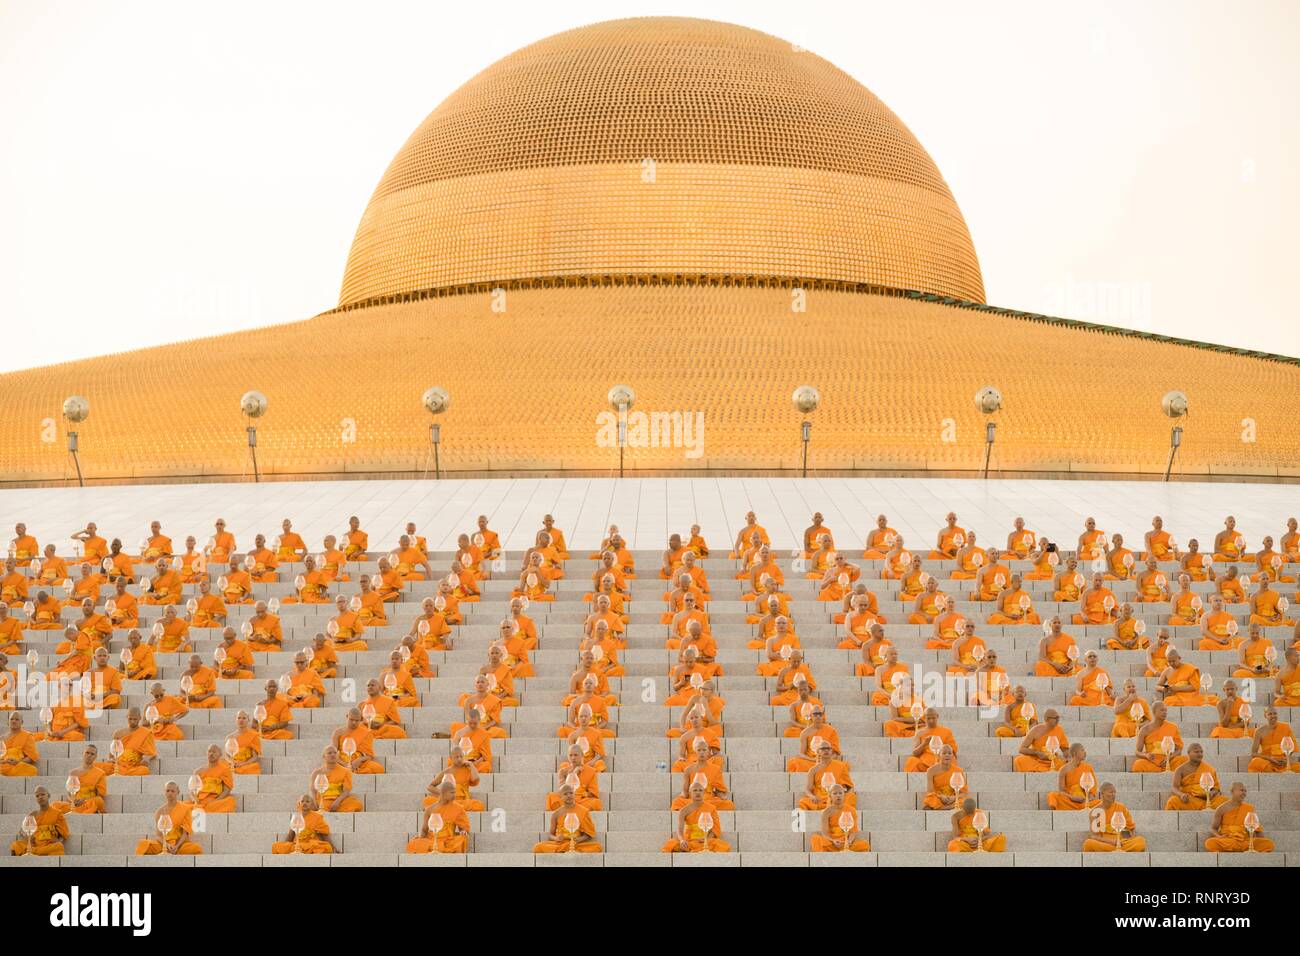 Monks seen praying while holding lanterns during the yearly Makha Bucha ceremony. Buddhist devotees celebrate the annual festival of Makha Bucha, one of the most important day for buddhists around the world. More than a thousand monks and hundred of thousand devotees were gathering at Dhammakaya Temple in Bangkok to attend the lighting ceremony. Stock Photo